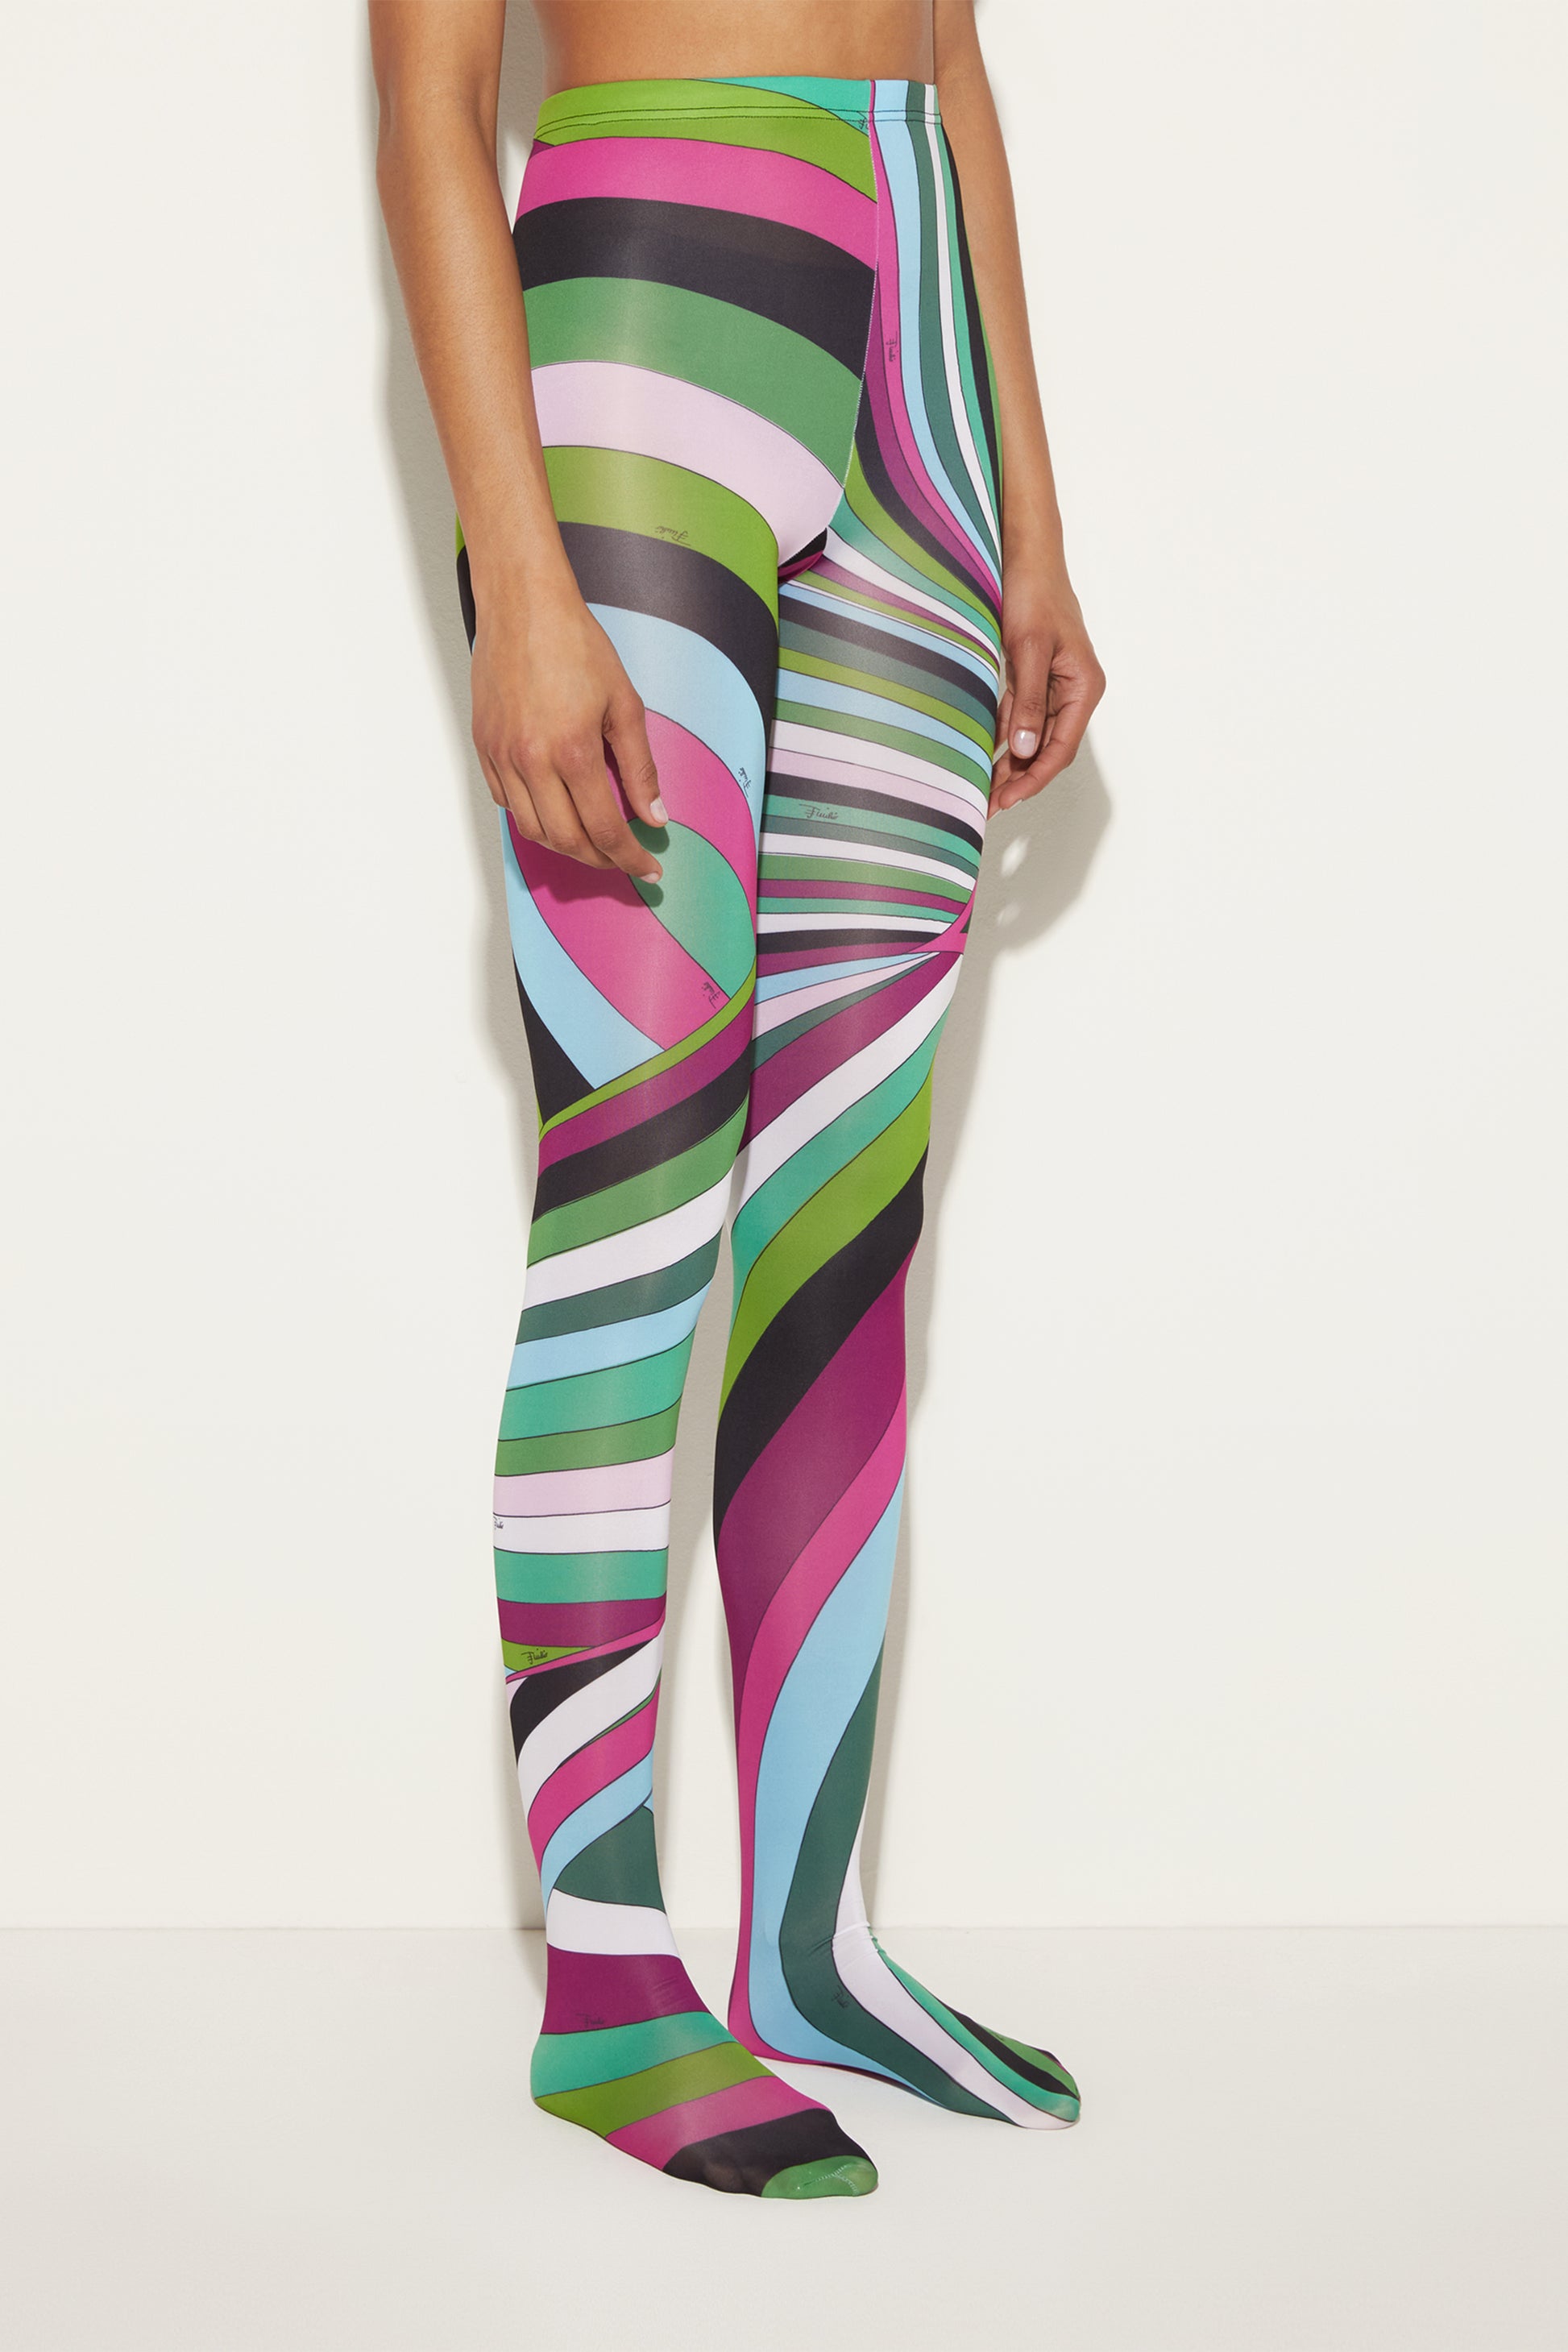 No One Does Colorful Tights Quite Like Pucci - Fashionista